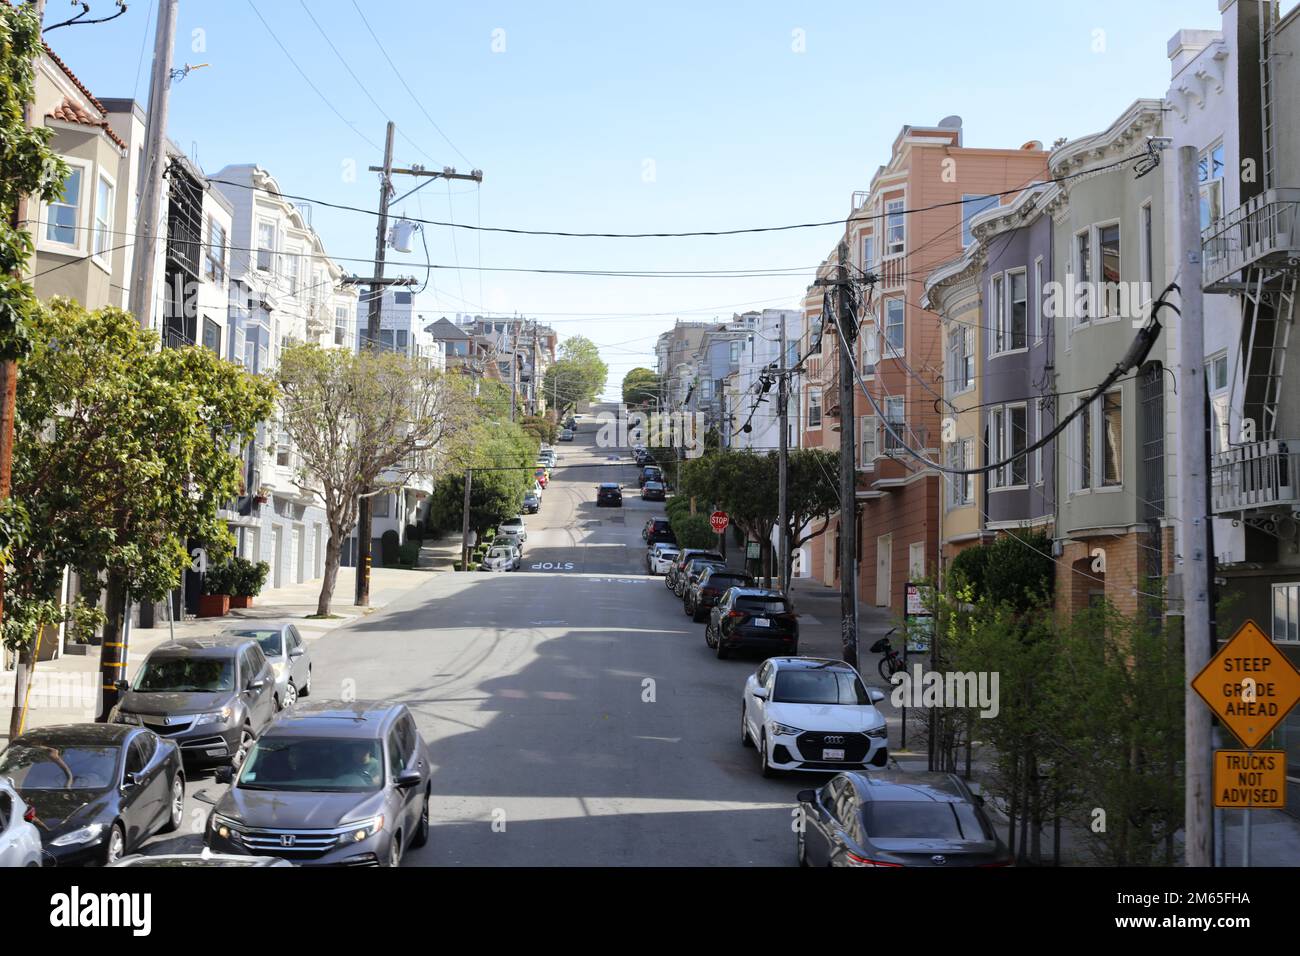 In the streets of san francisco, california. To Travel is to live. Stock Photo